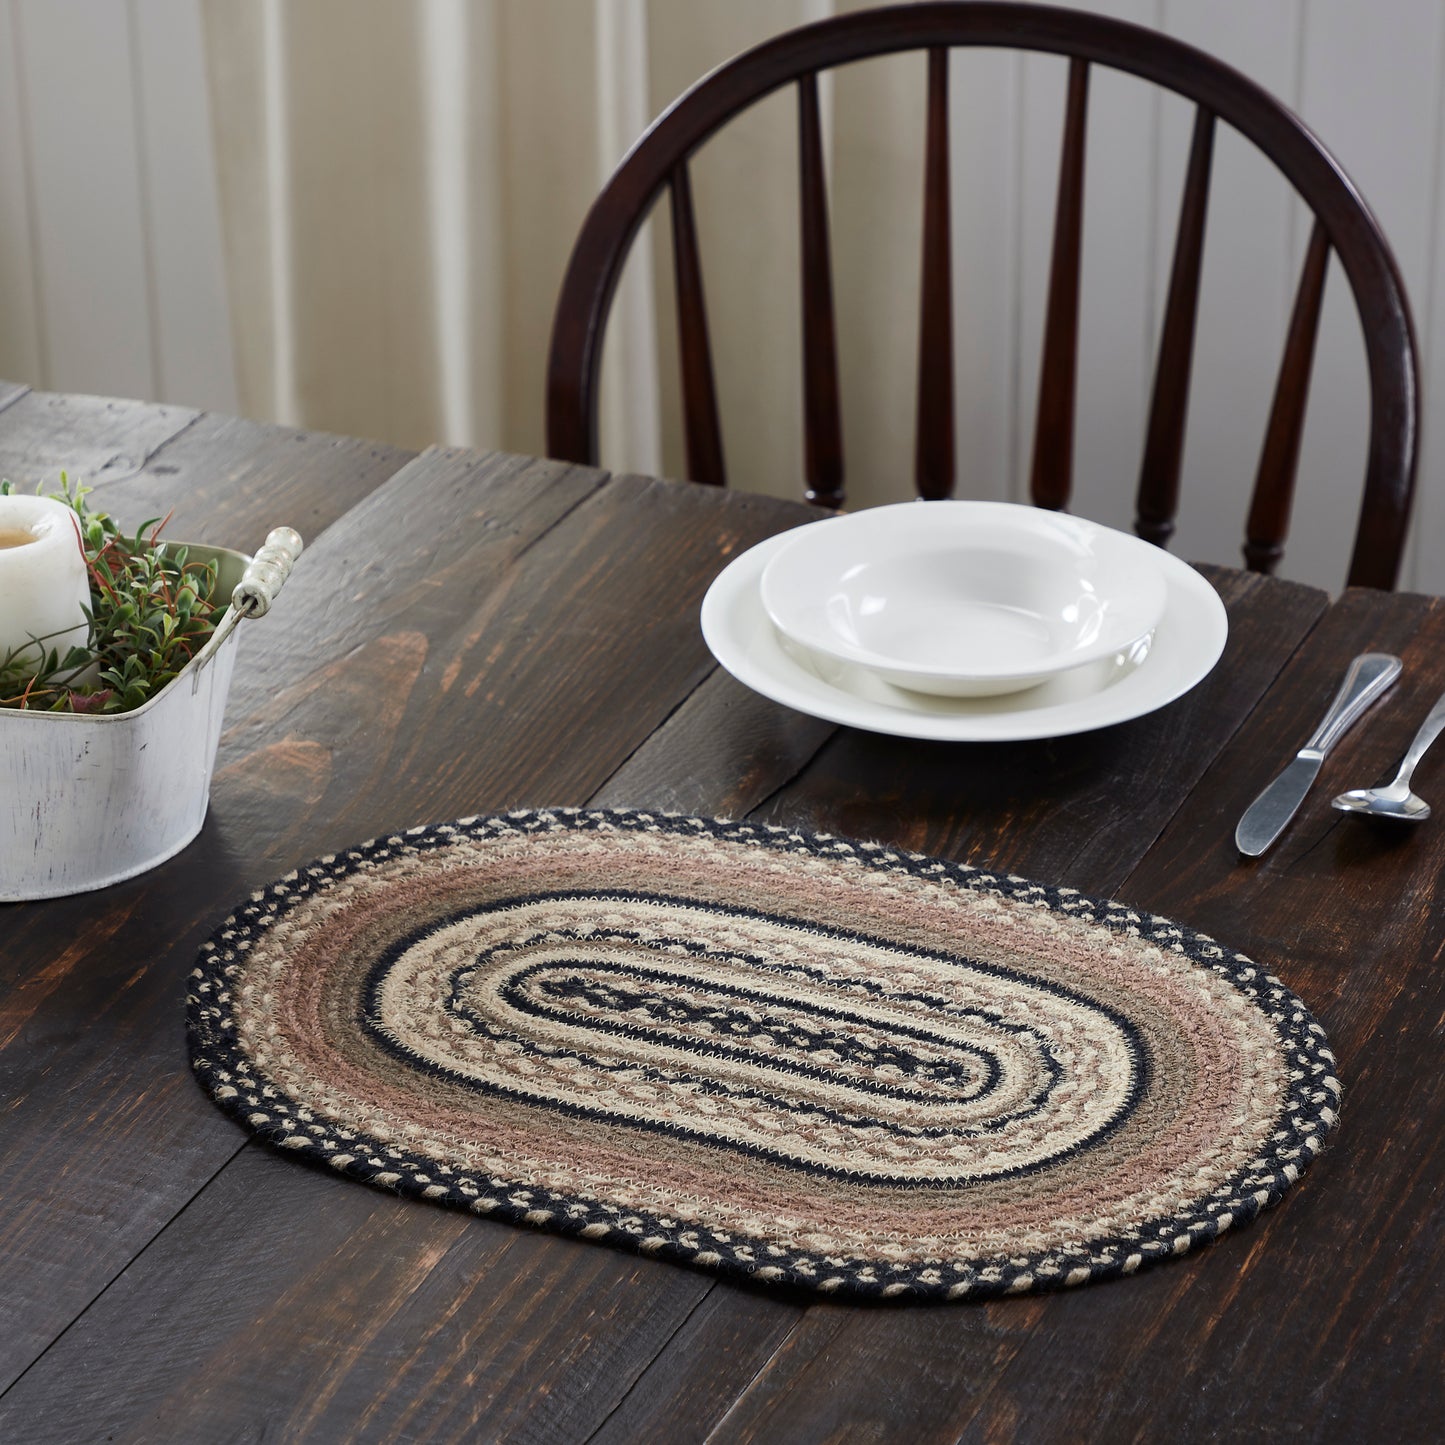 81448-Sawyer-Mill-Charcoal-Creme-Jute-Oval-Placemat-12x18-image-5